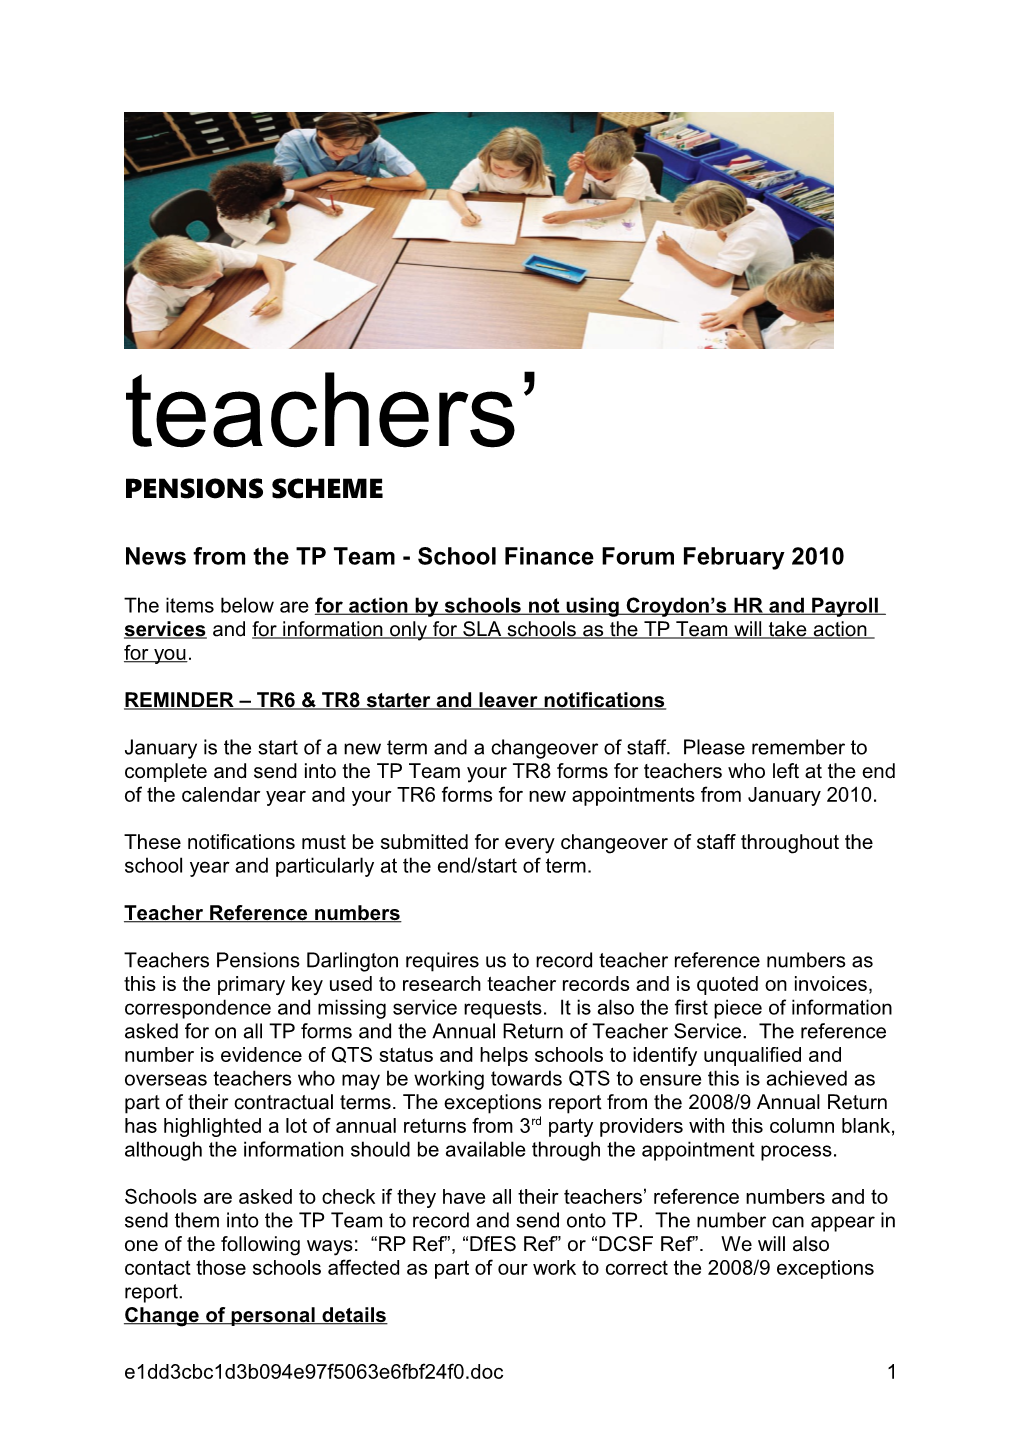 News from the TP Team - School Finance Forum February 2010